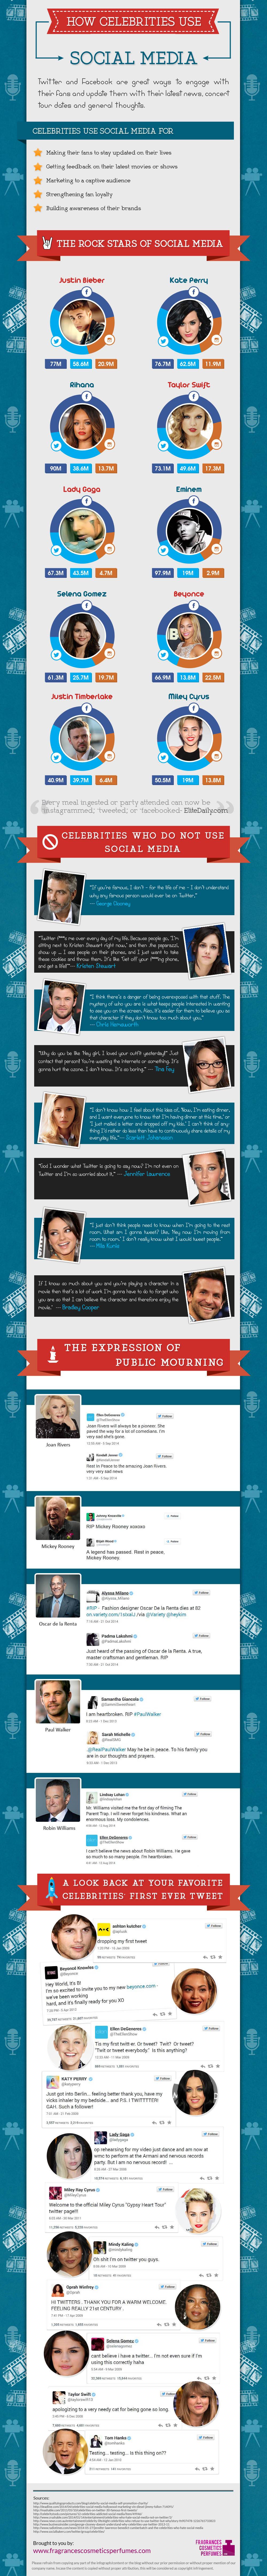 How Social Are Celebrities on Social Media